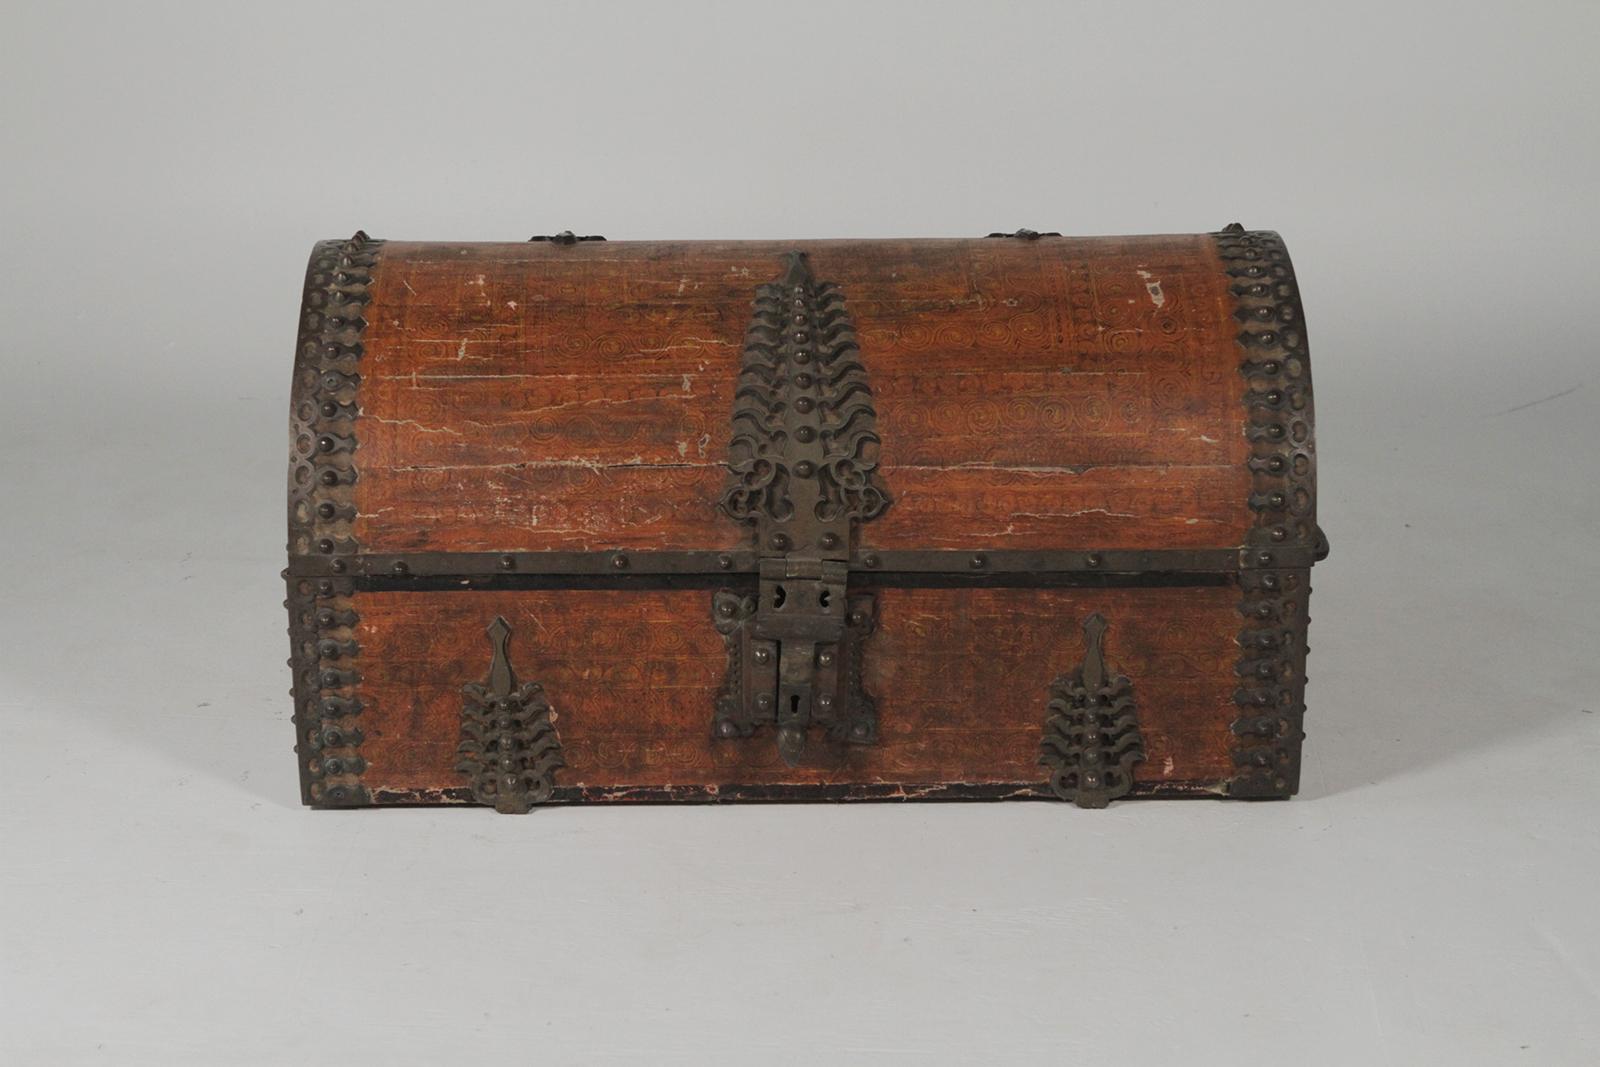 Antique Asian Indian brass clad dowry chest, circa 1880 made in India, appropriate wear throughout minor losses to fabric, interior stains, later silk interior, no key.